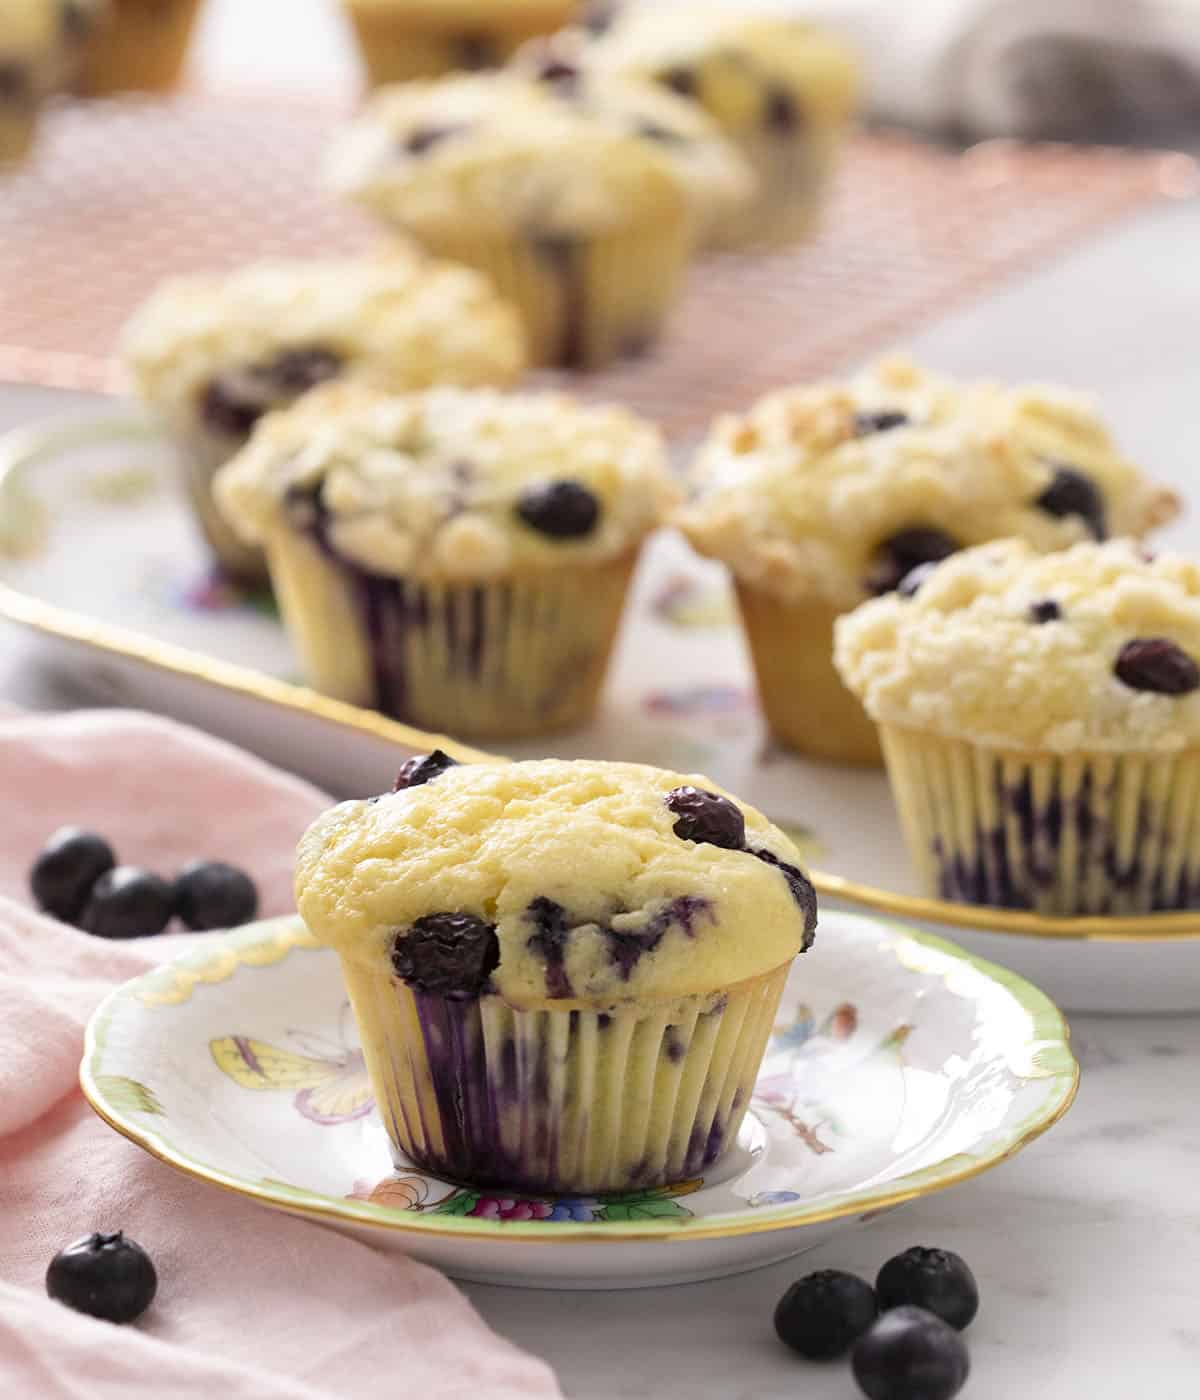 A blueberry muffin on a small plate with a platter of more muffins in the background.